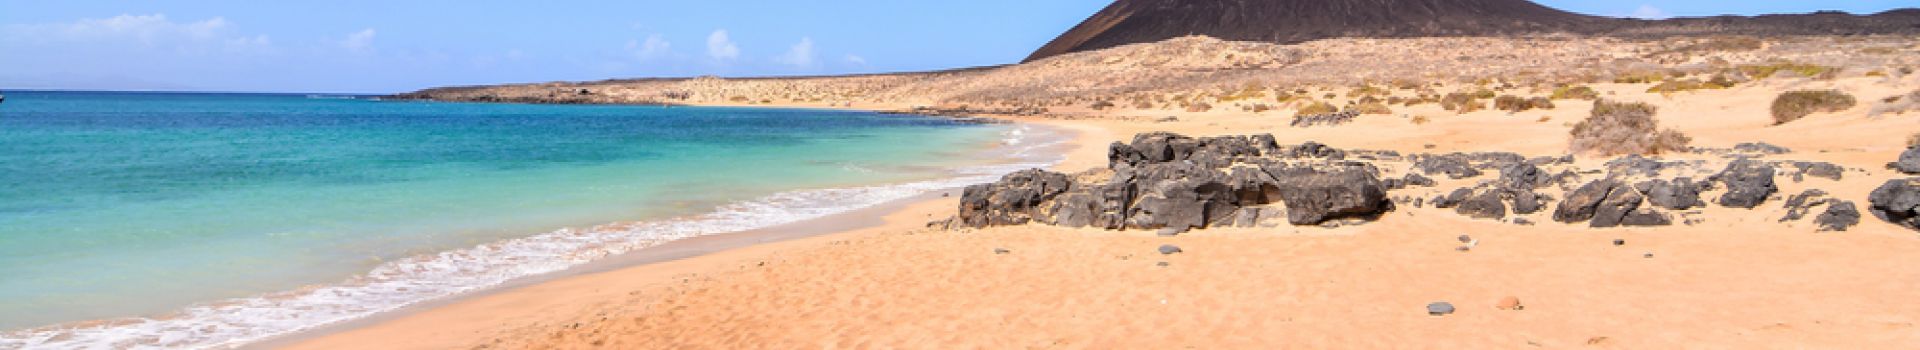 Cheap holidays to Lanzarote from Belfast - Cassidy Travel